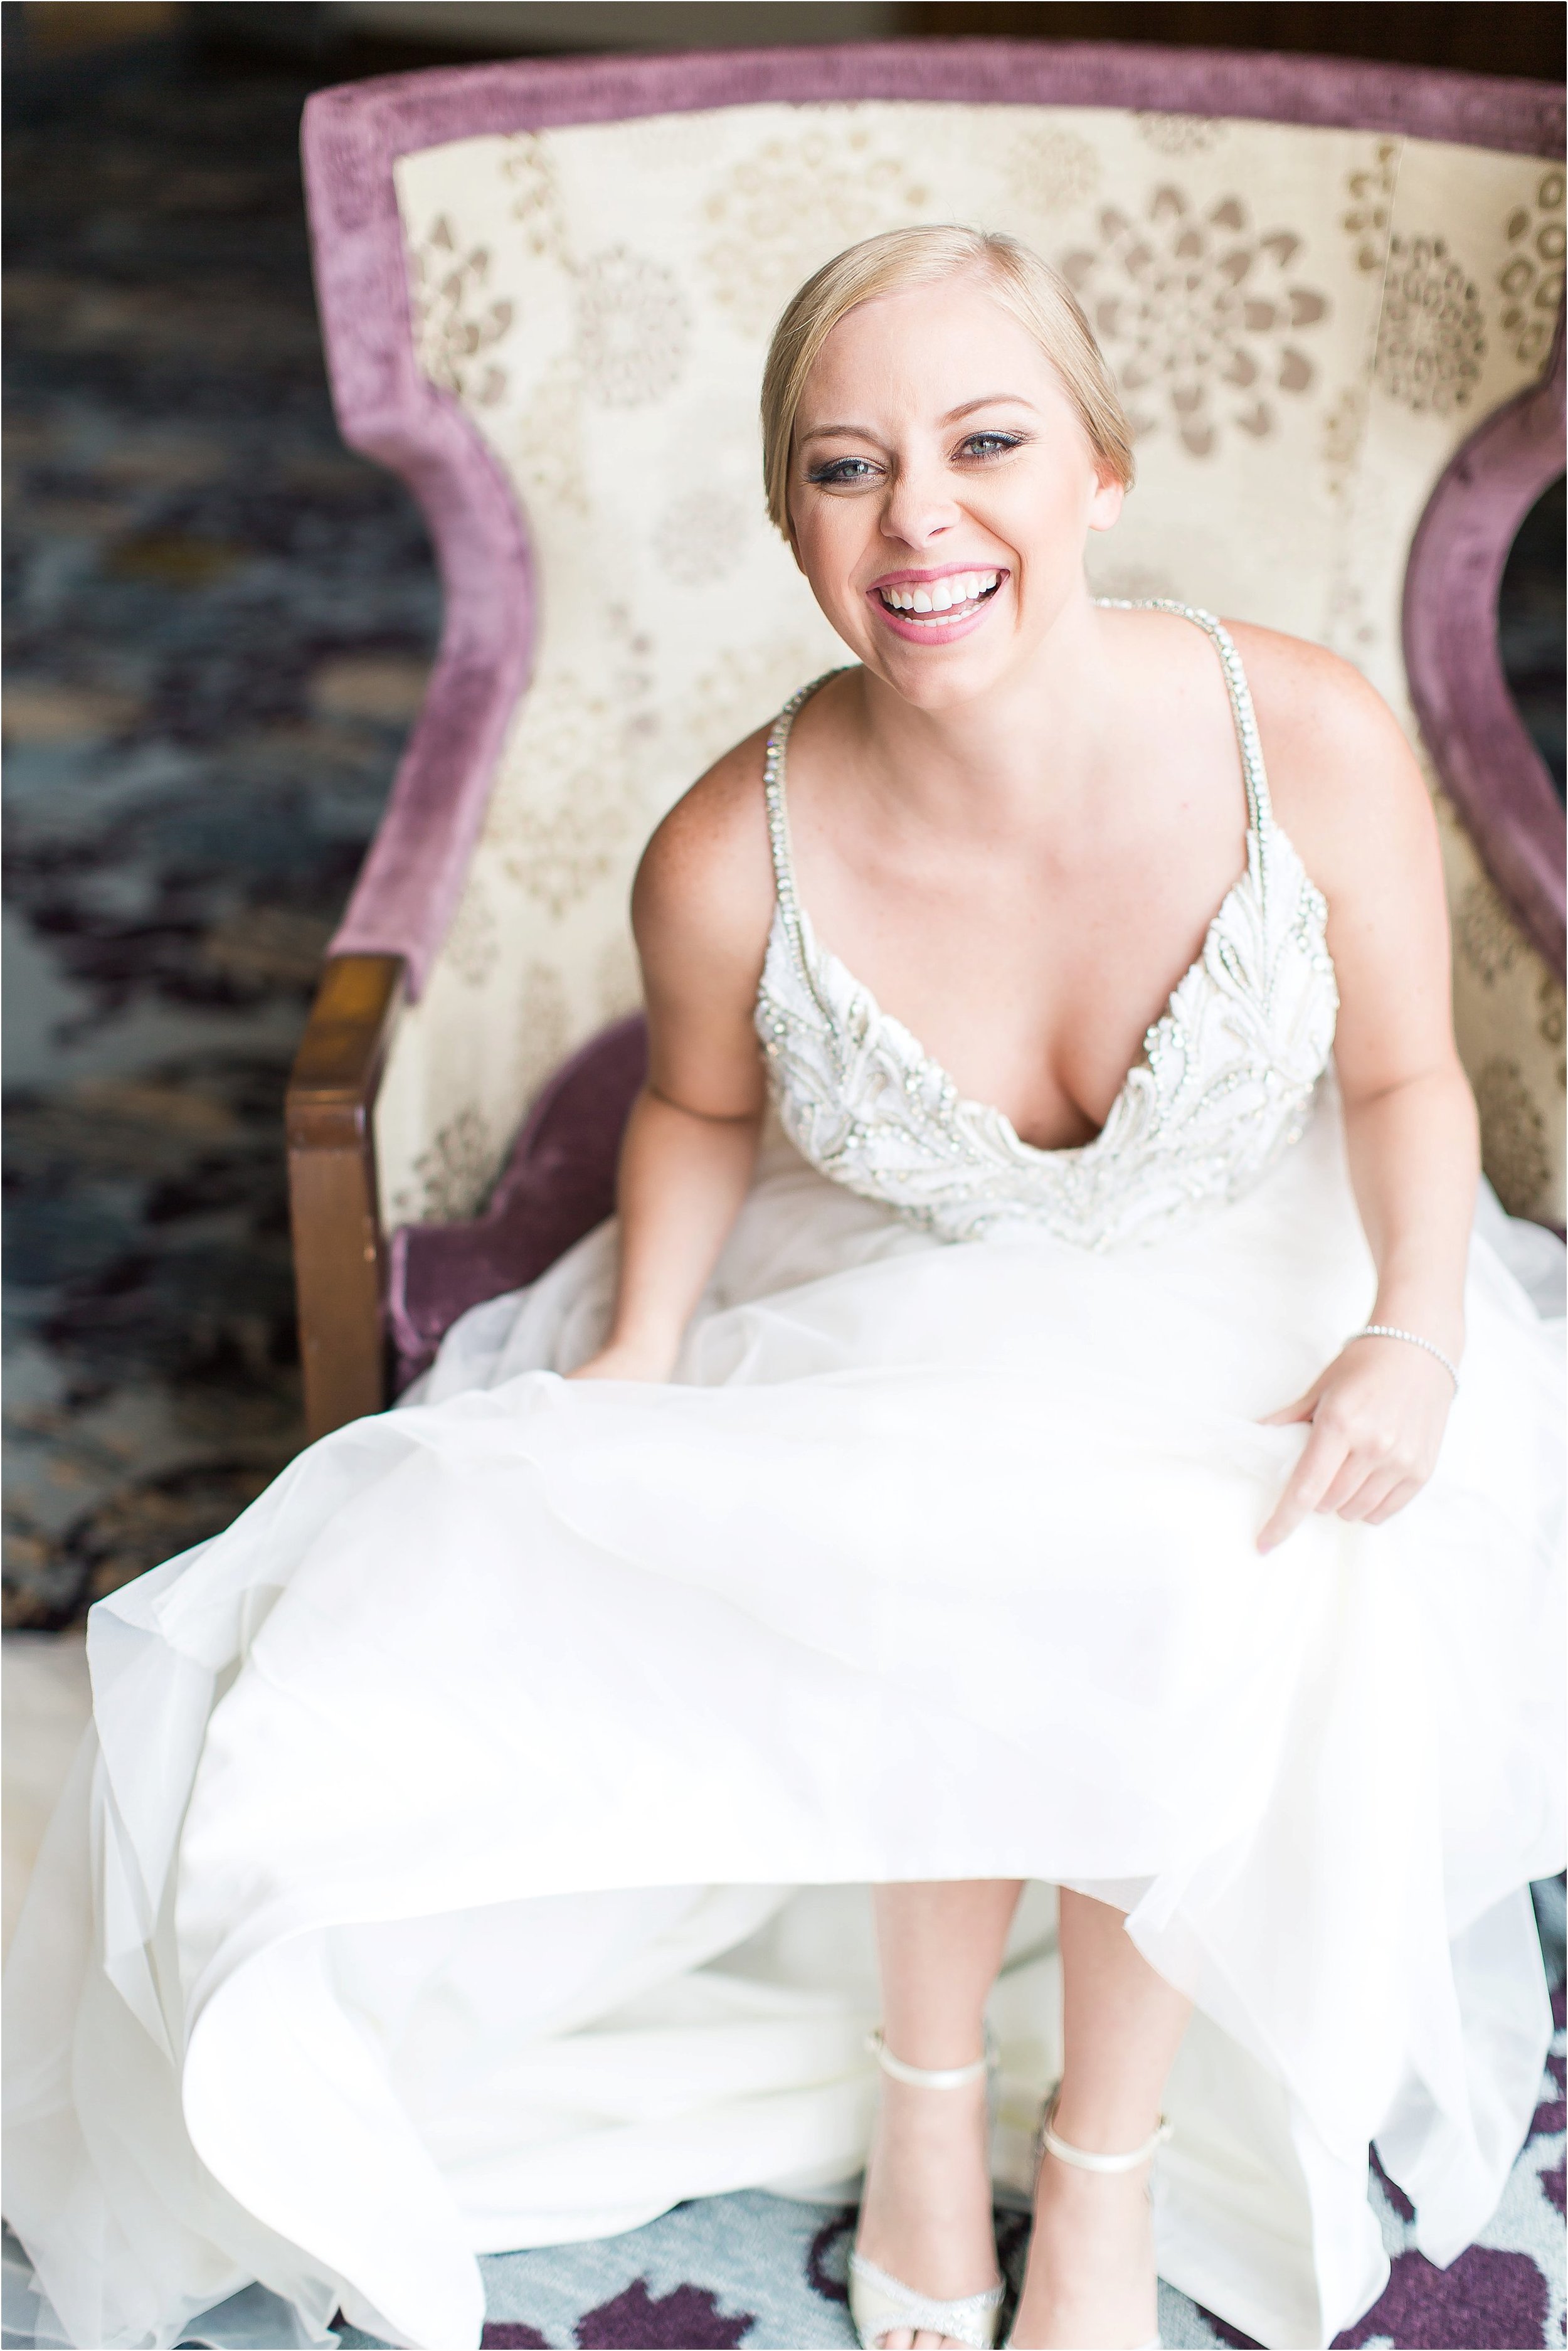 Timeless bridal portrait in Hayley Paige wedding gown Hayley Paige wedding gown getting ready moments at Bonnet Creek Wedding by PSJ Photography